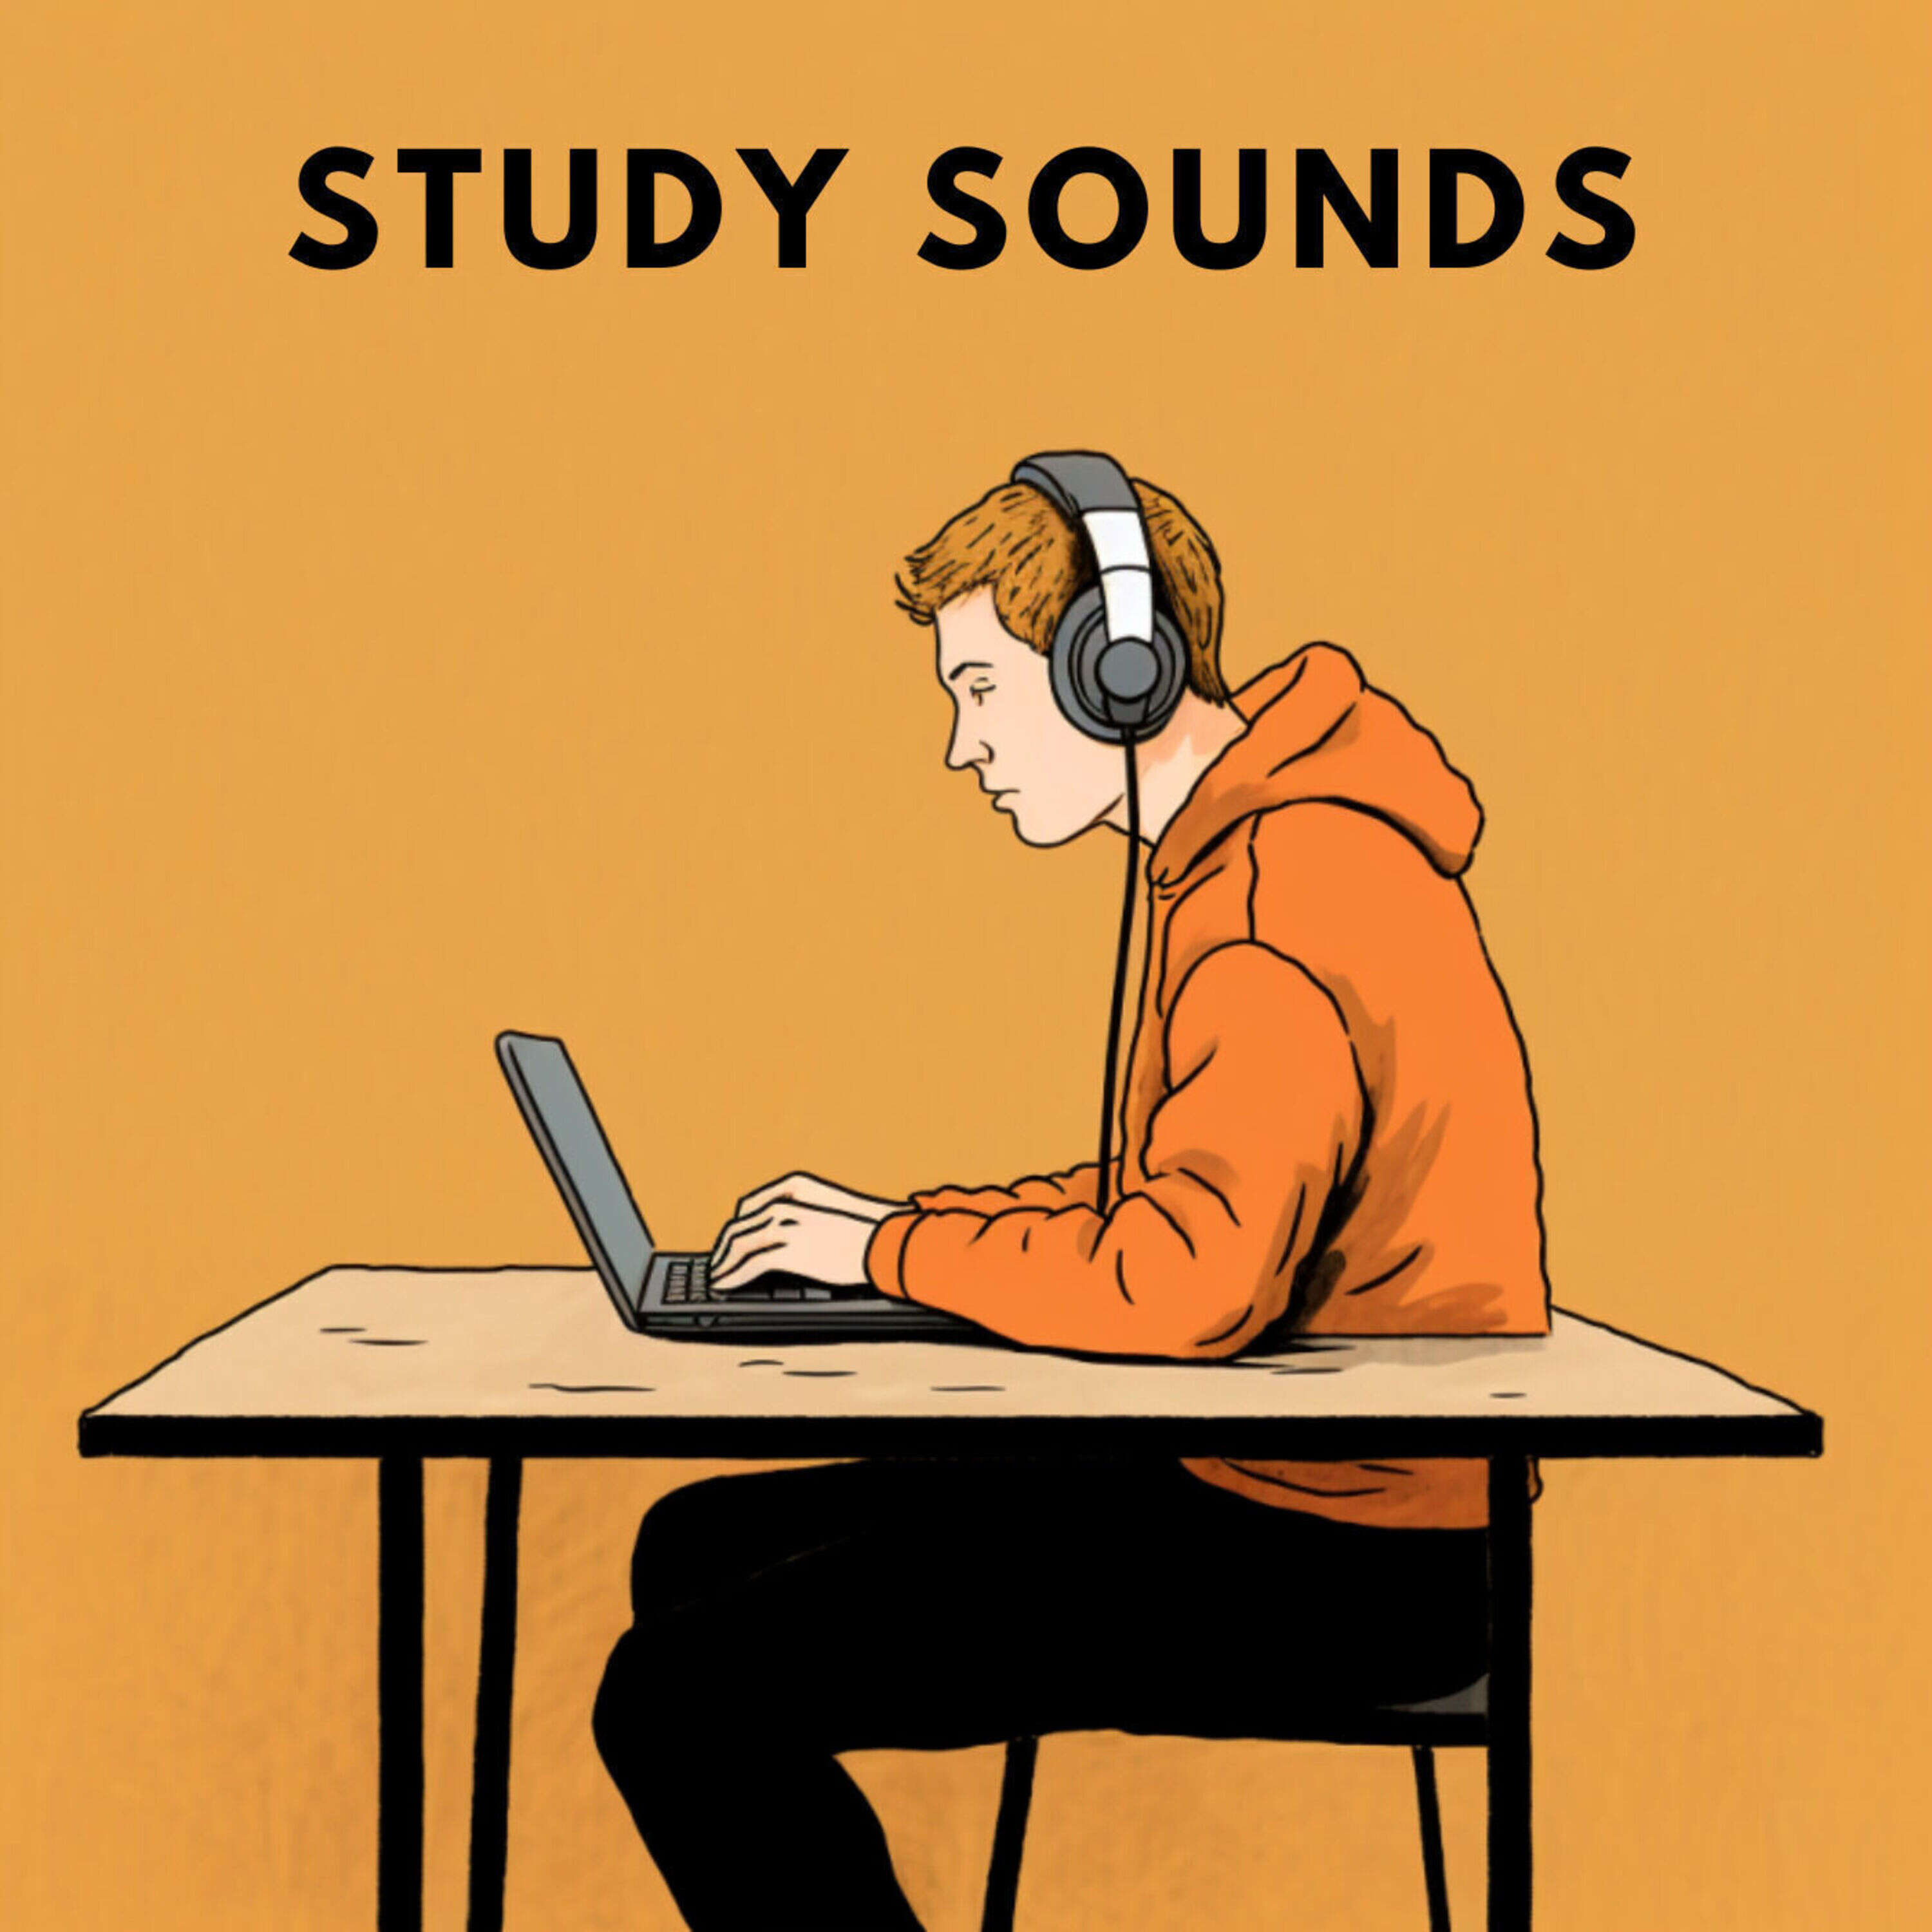 Deep Focus - sounds For Studying, Concentration and Work